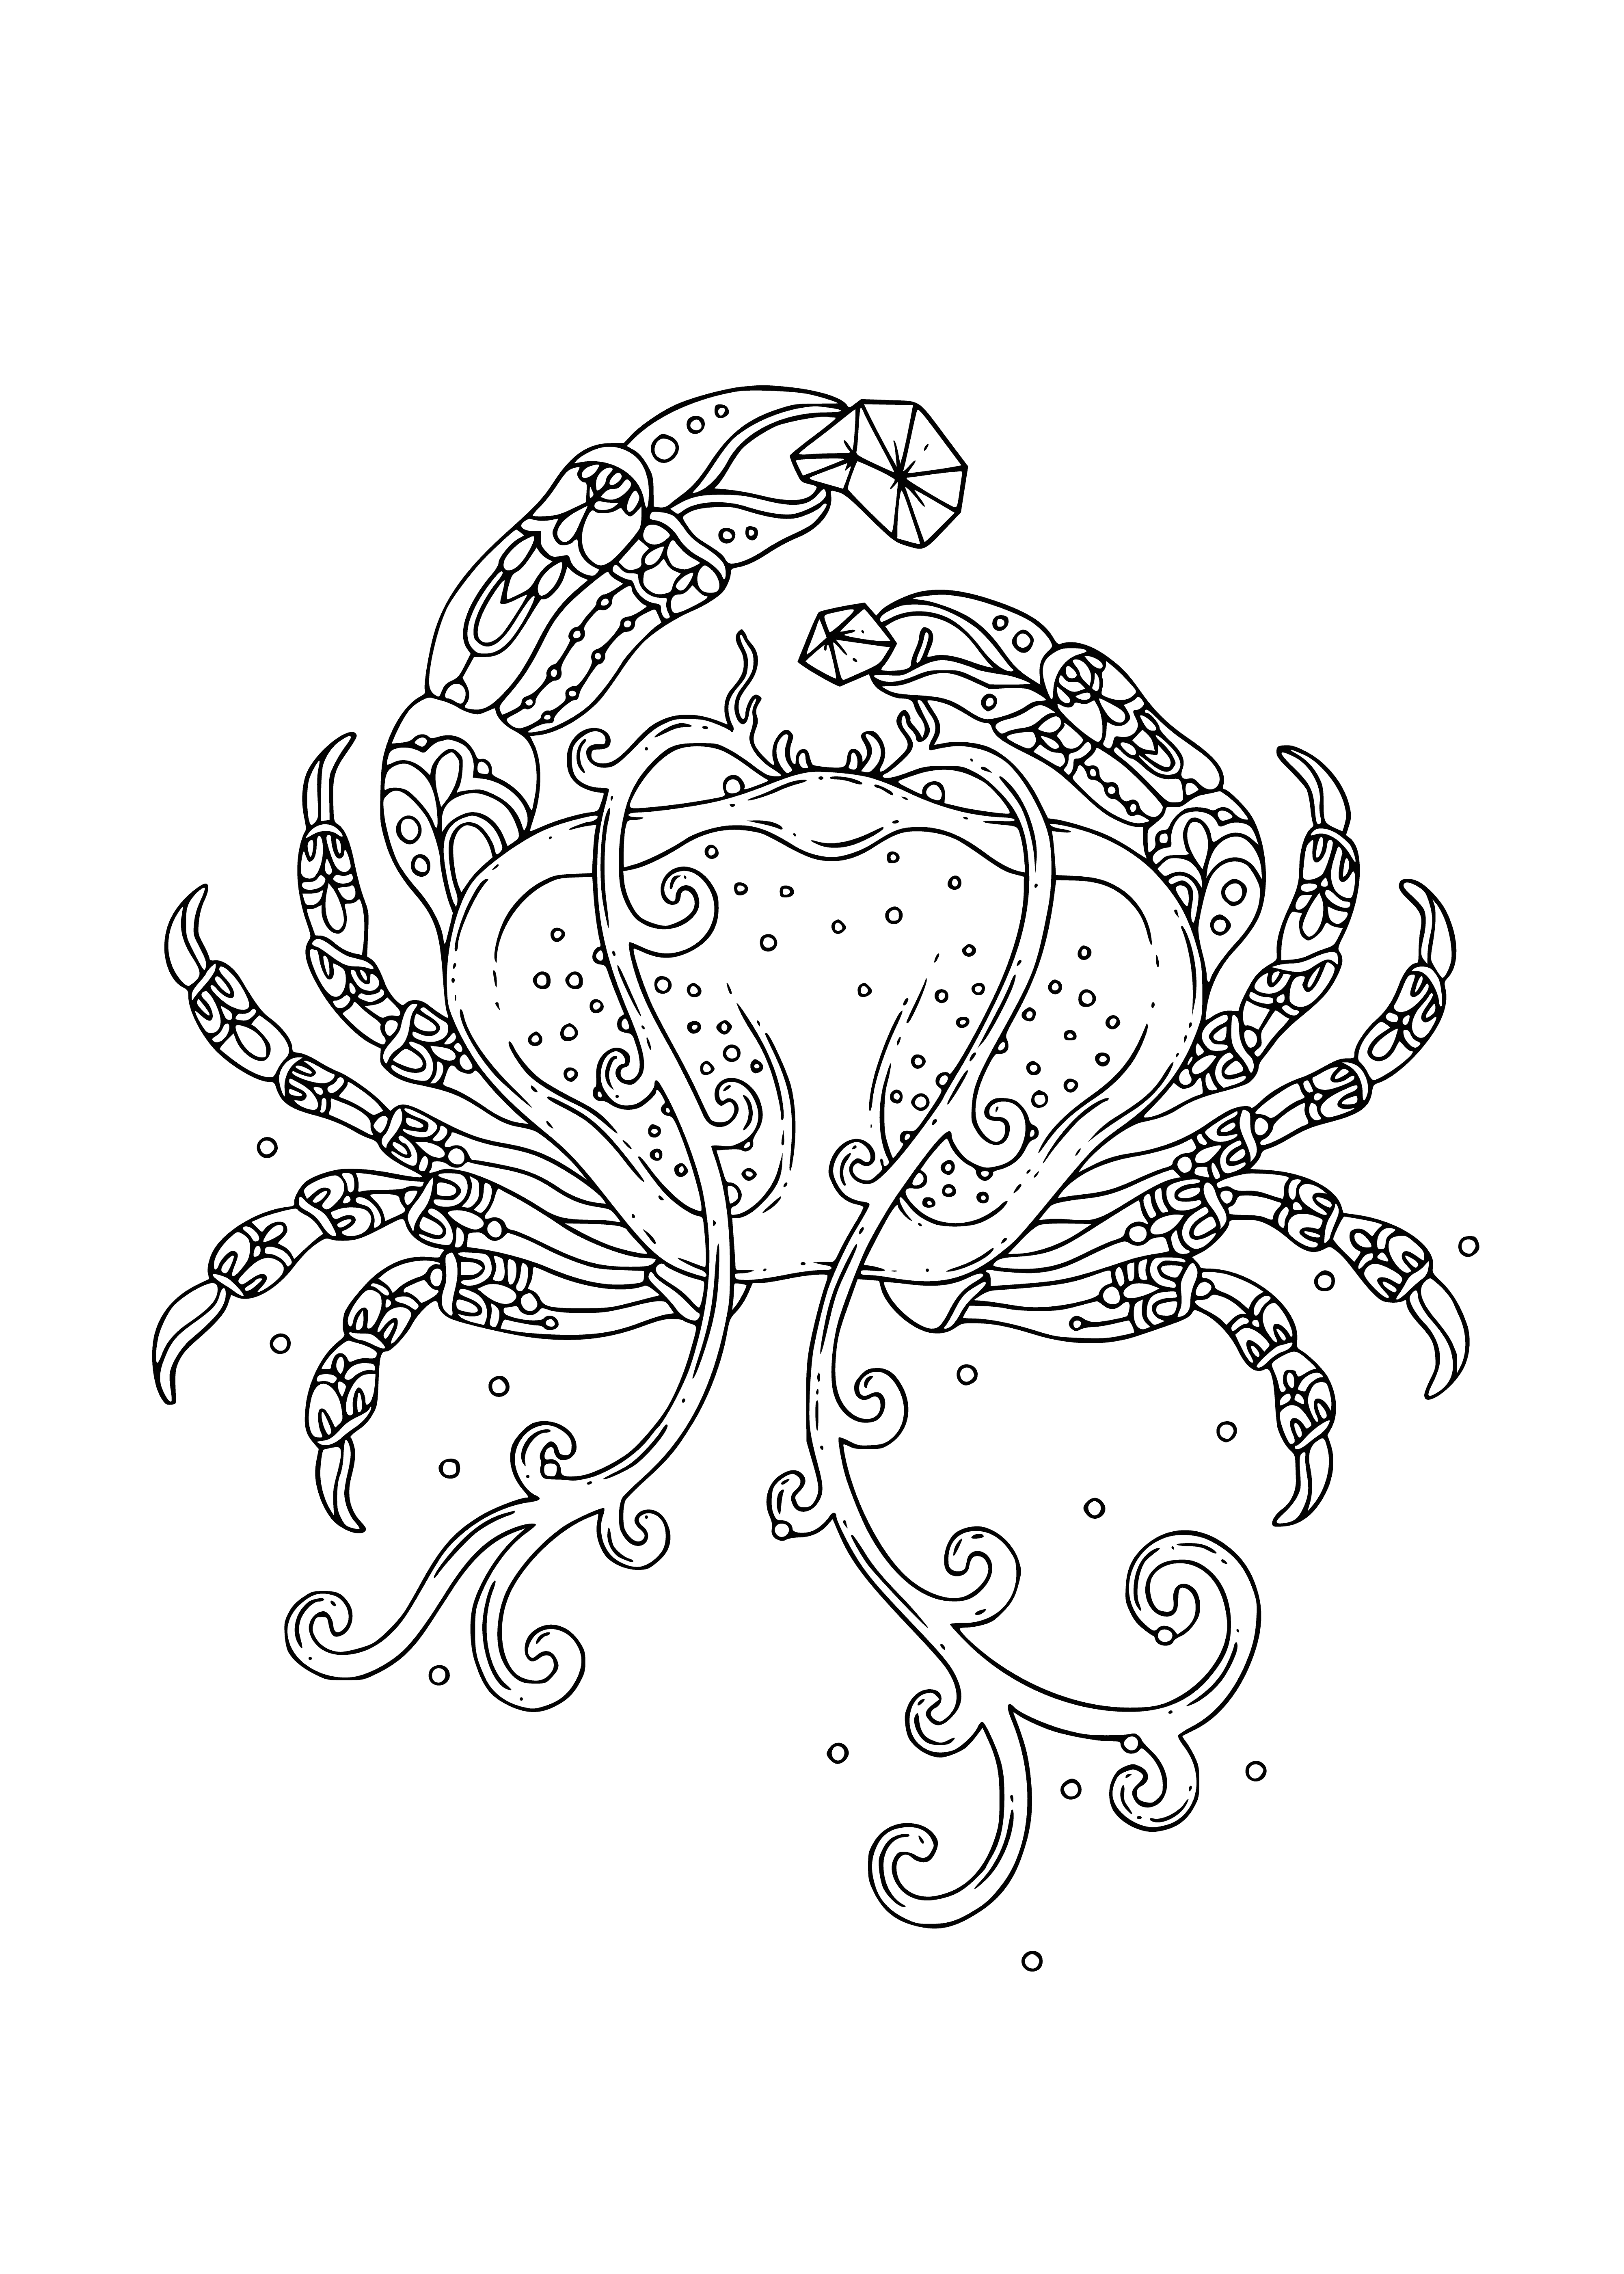 coloring page: Sea crab content in its own blue world, clinging to rocks and watching fish swim by.